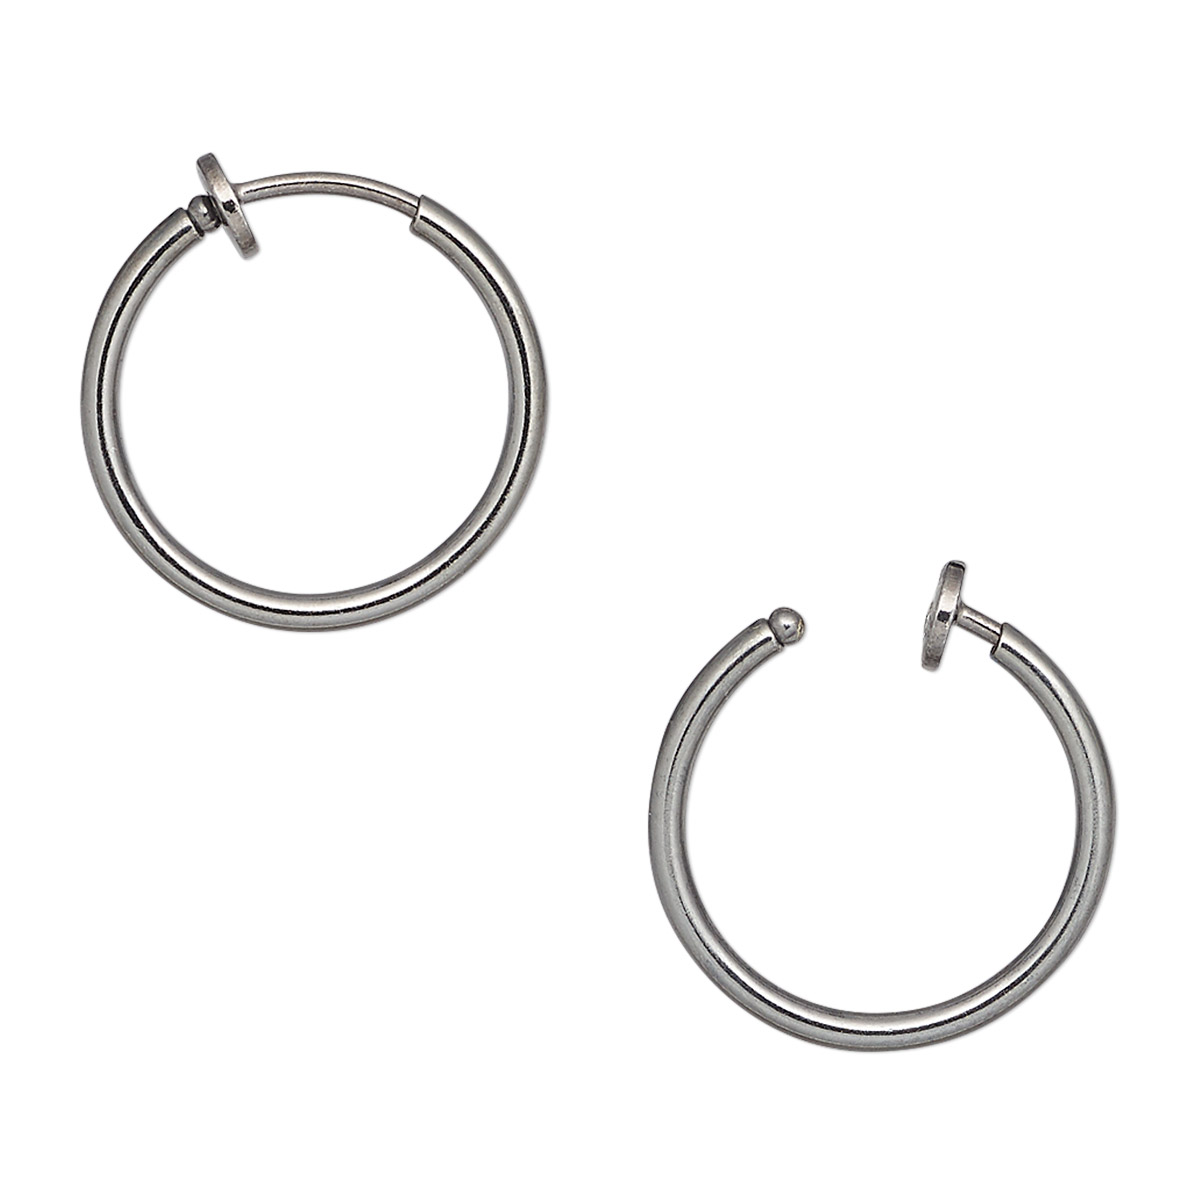 Earring, gunmetal-finished brass, 17mm round hoop with pierced-look ...